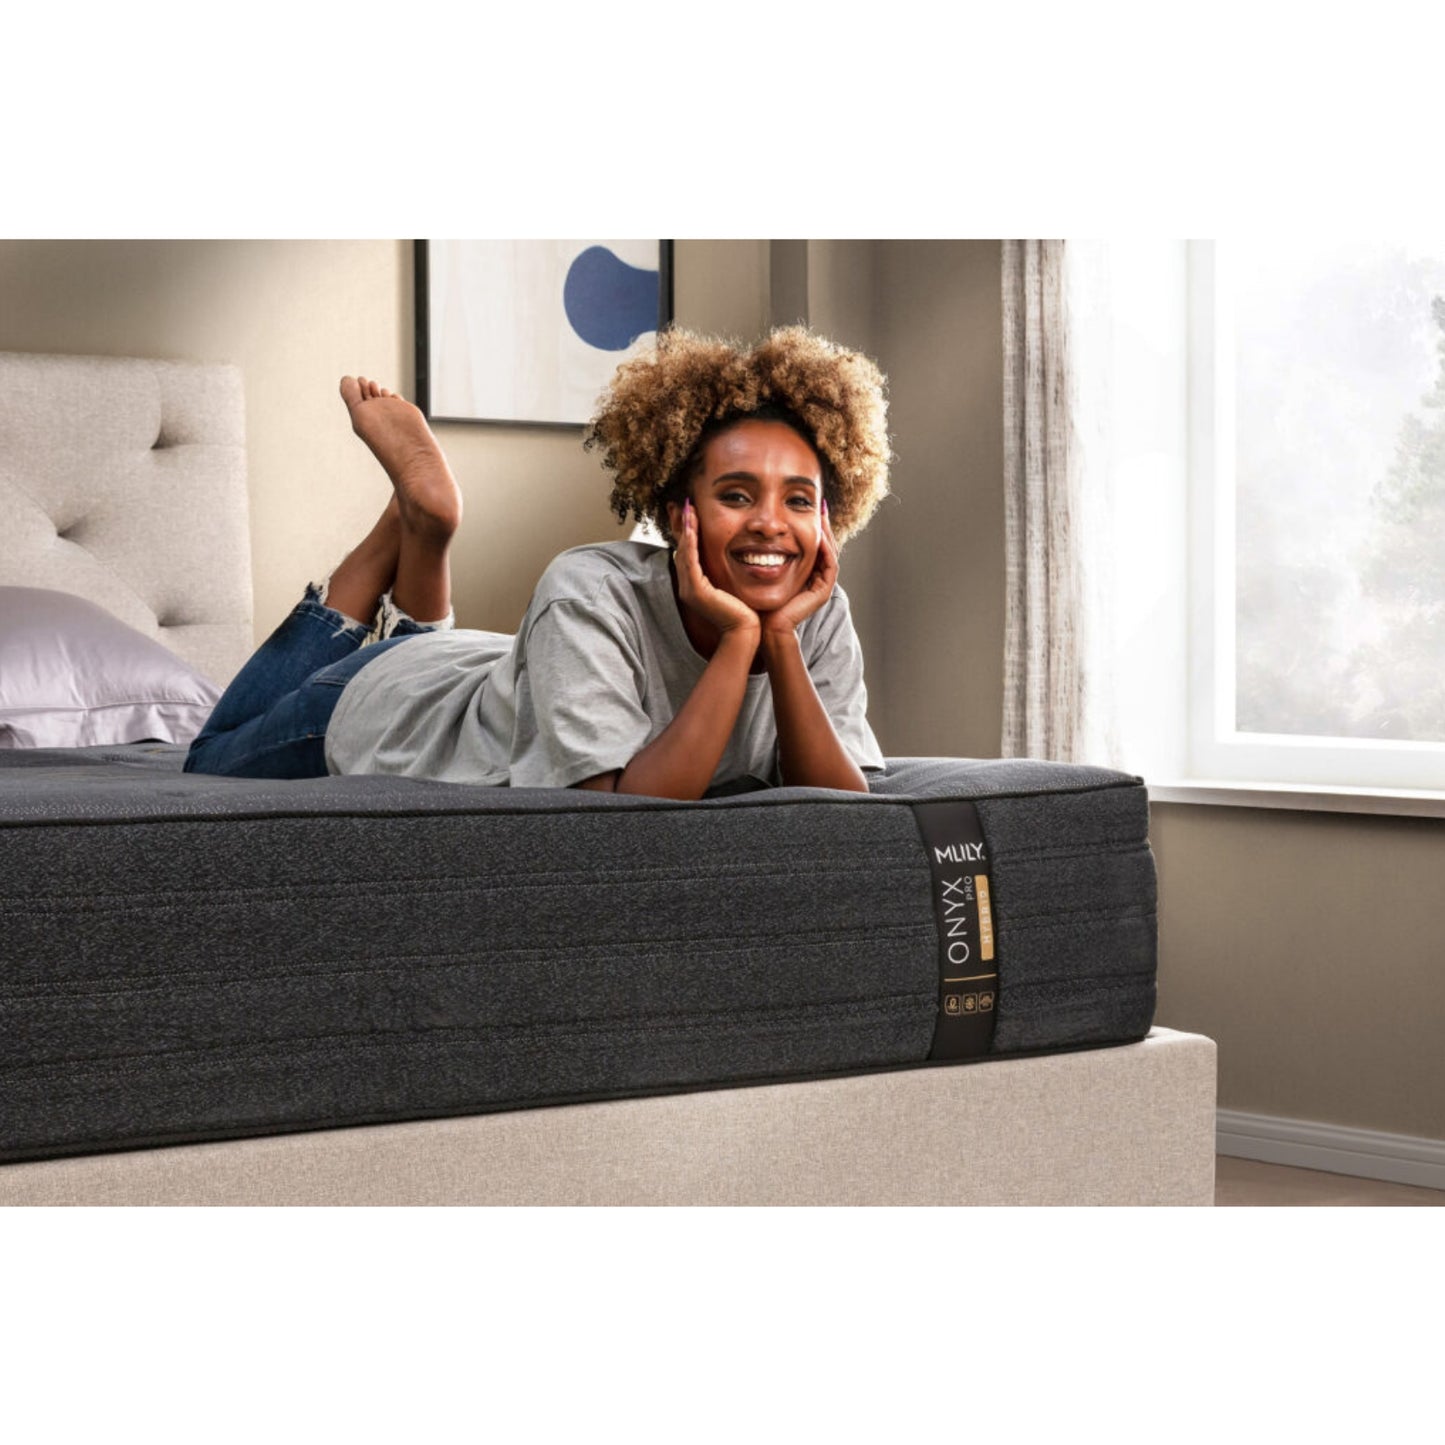 ONYX Pro 13" Hybrid Mattress With Copper Infused Memory Foam Inside Of A Bedroom With A Woman Lying On Her Stomach